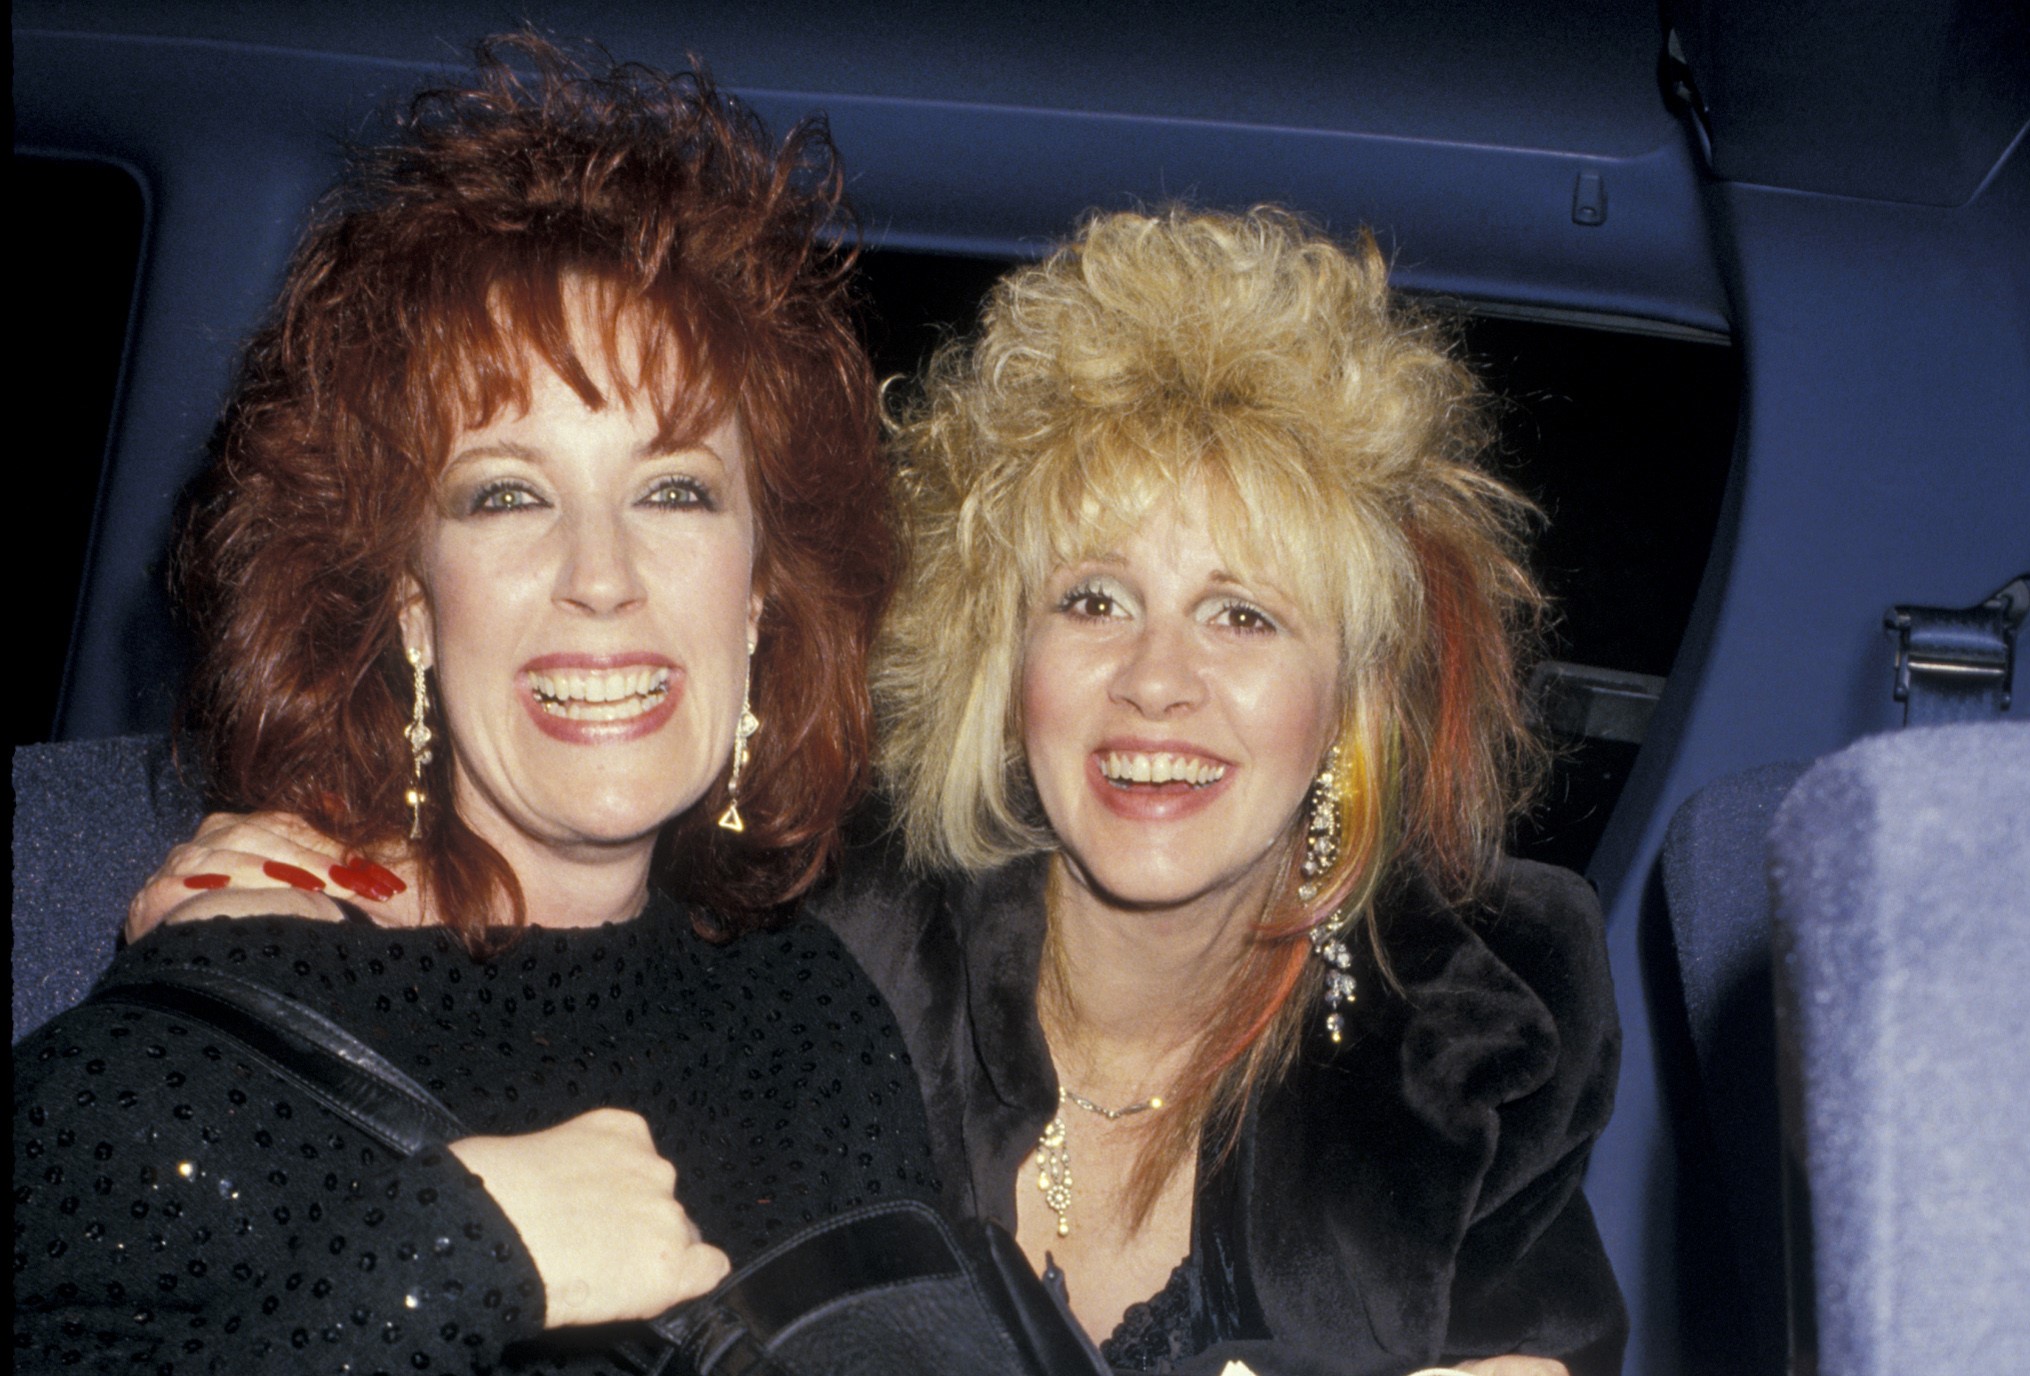 Stevie Nicks and a friend wear black and sit in a car together.